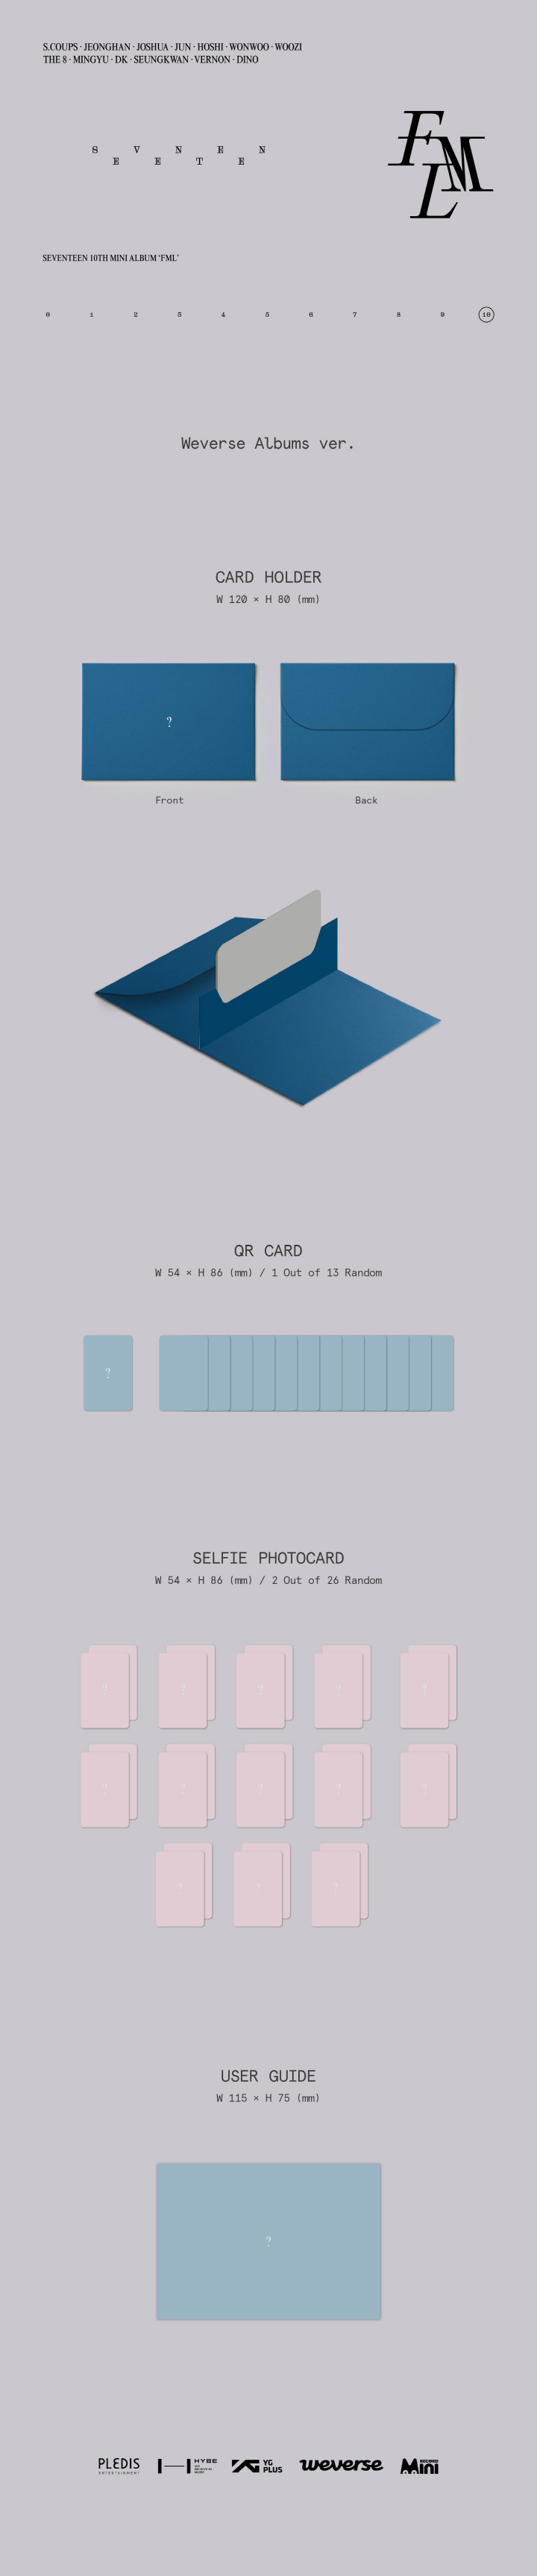 SEVENTEEN  10th Mini Album FMLWeverse Albums ver and  with weverse shop gift